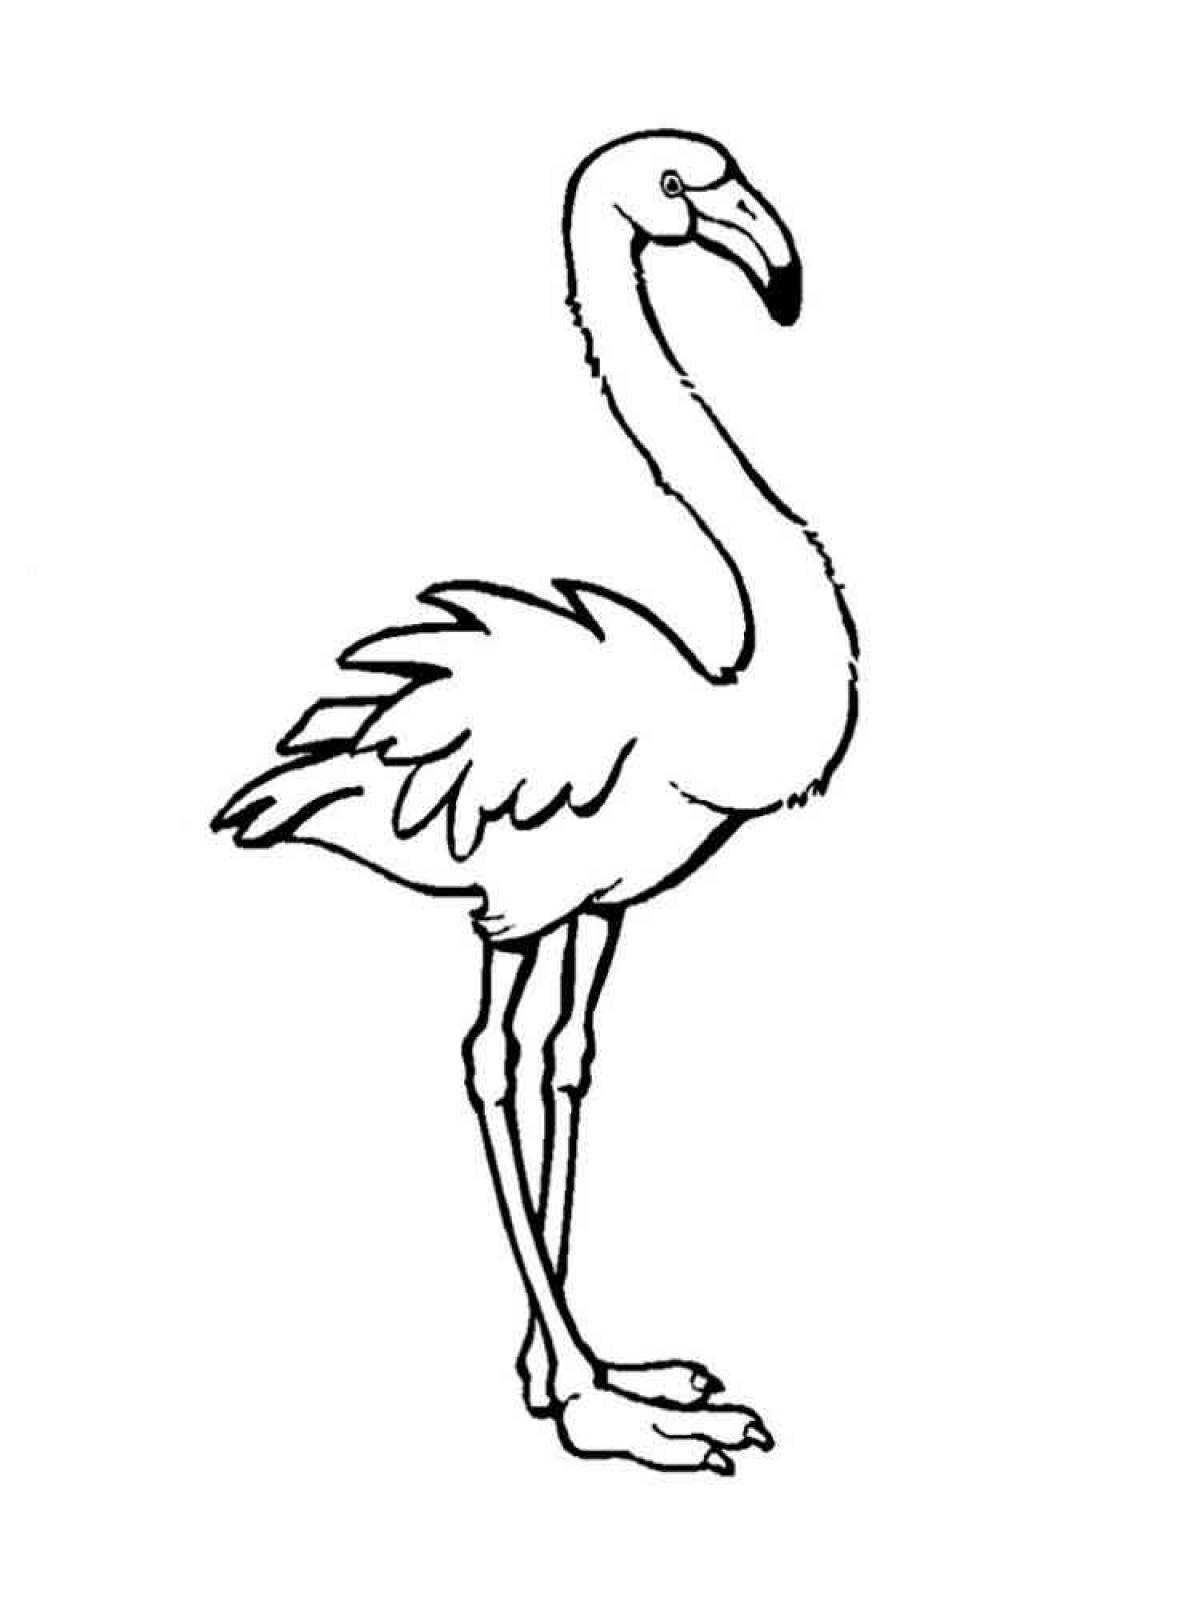 Coloring for children with colorful flamingos